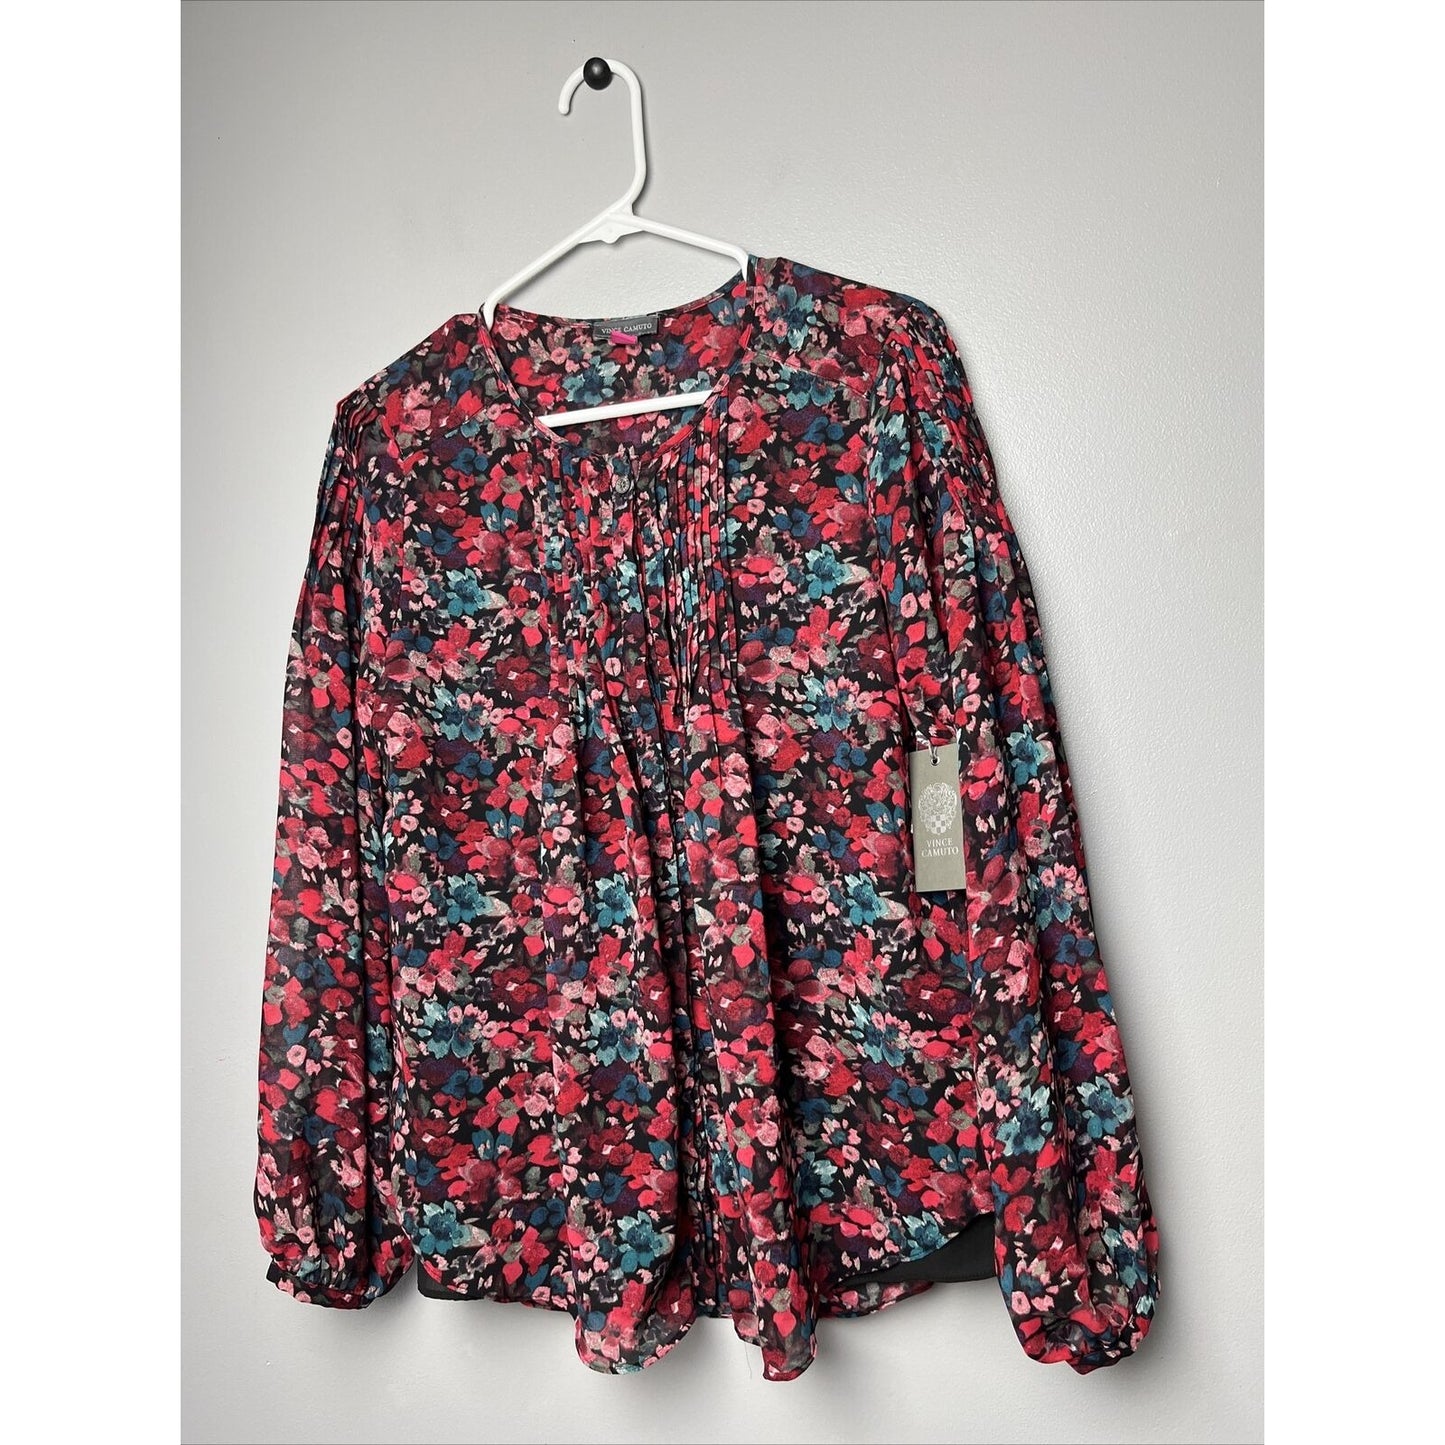 VINCE CAMUTO Womens Floral Print Pleated Blouse Size Small